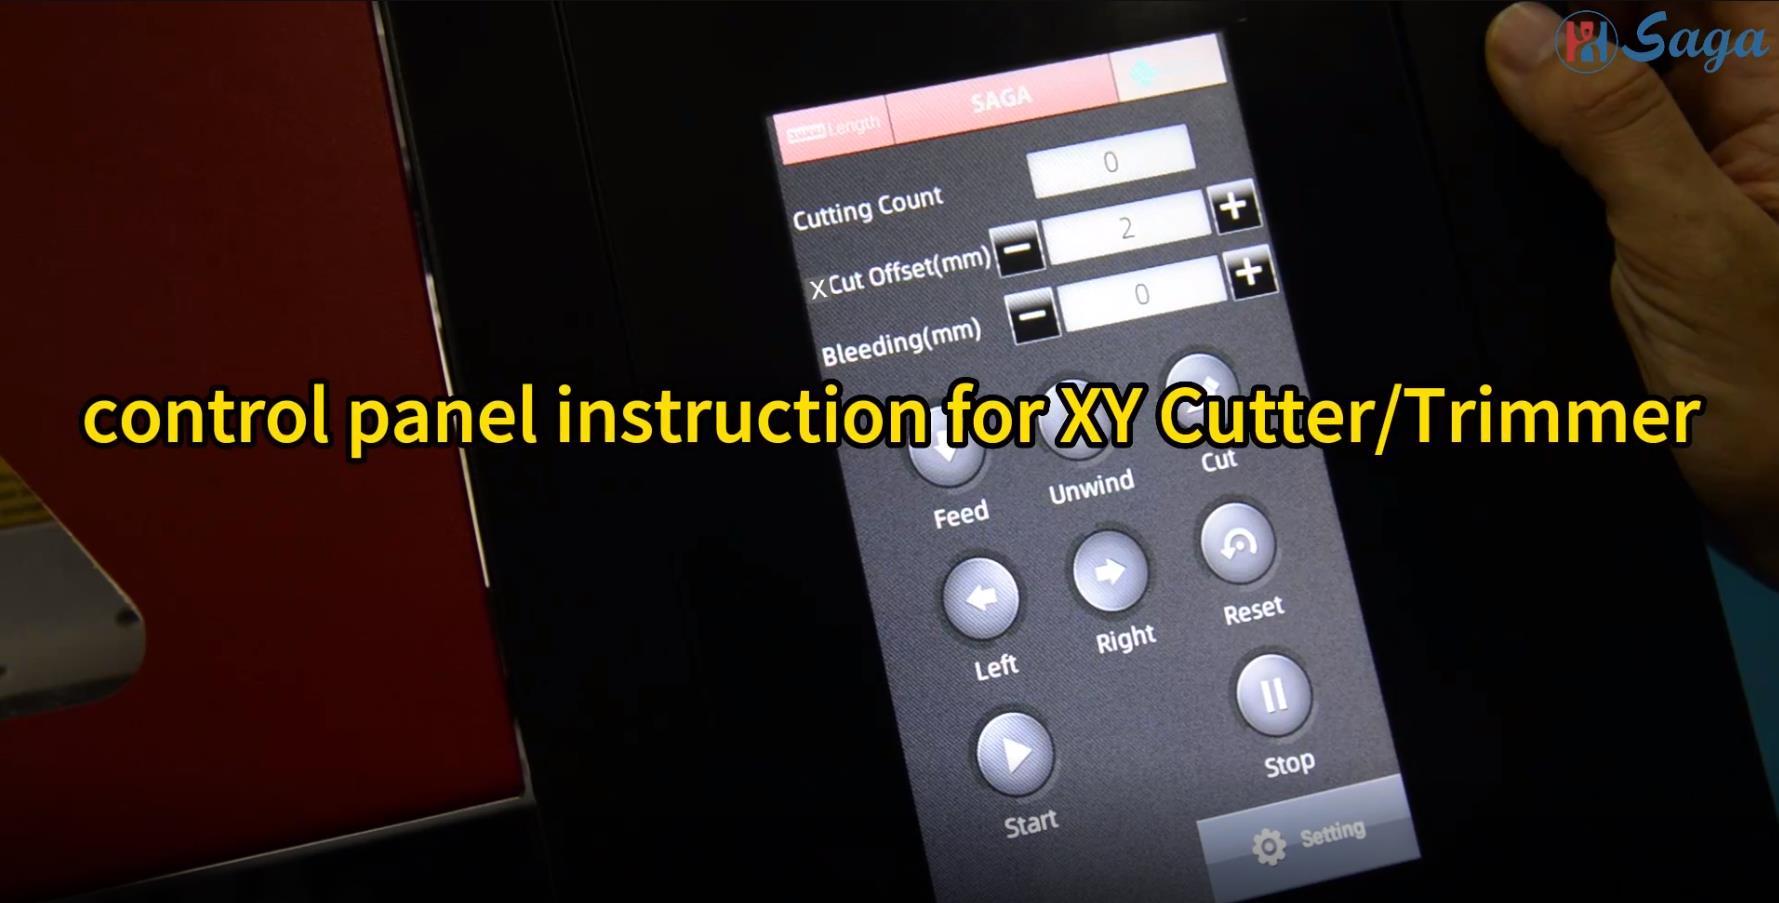 control panel instruction for XY Cutter/Trimmer